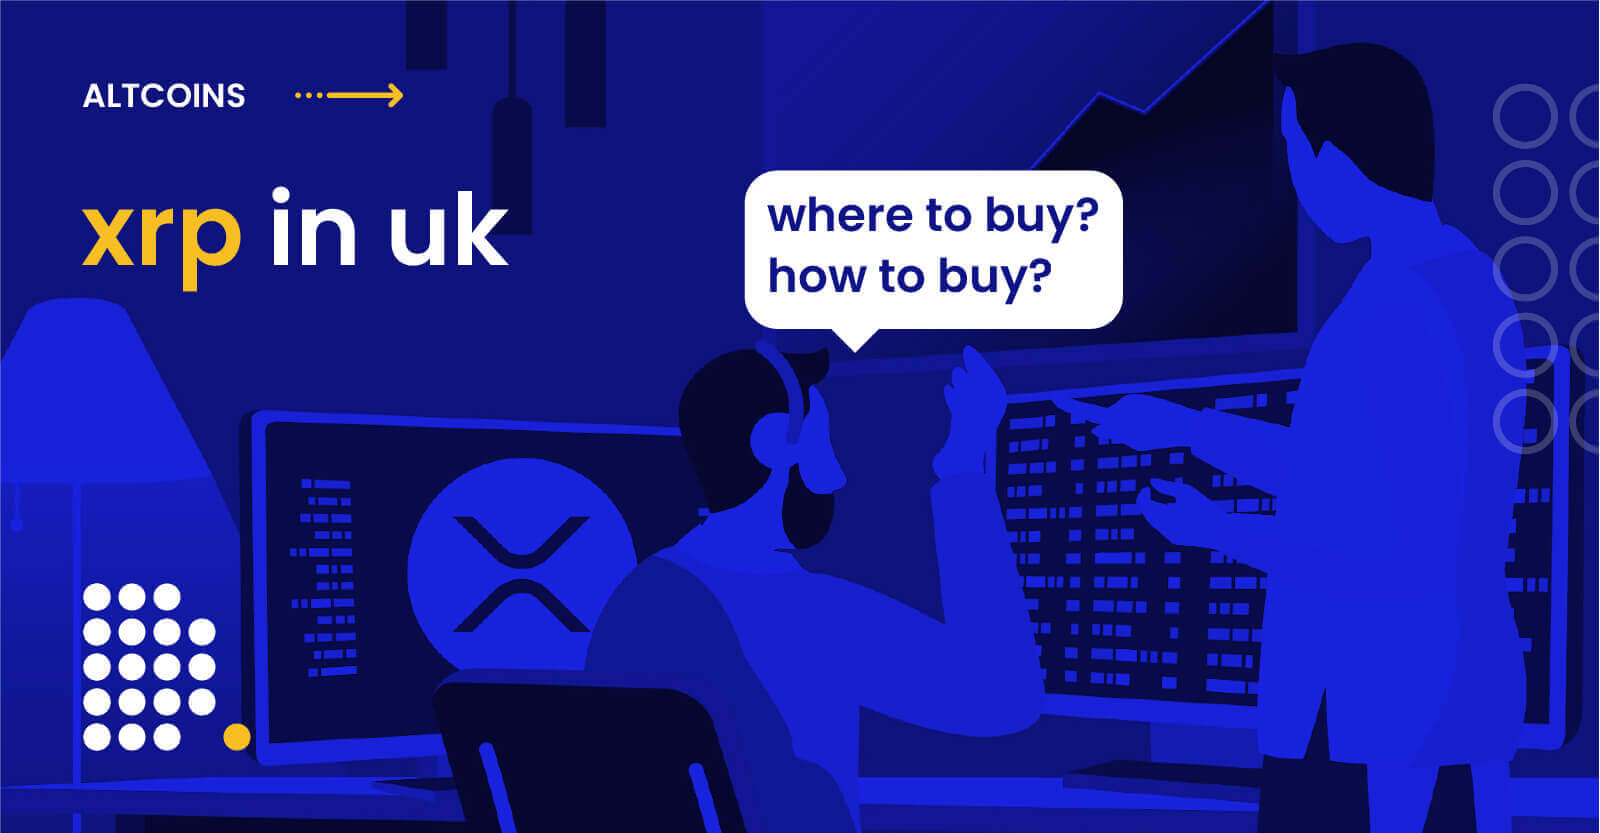 How to buy xrp in uk